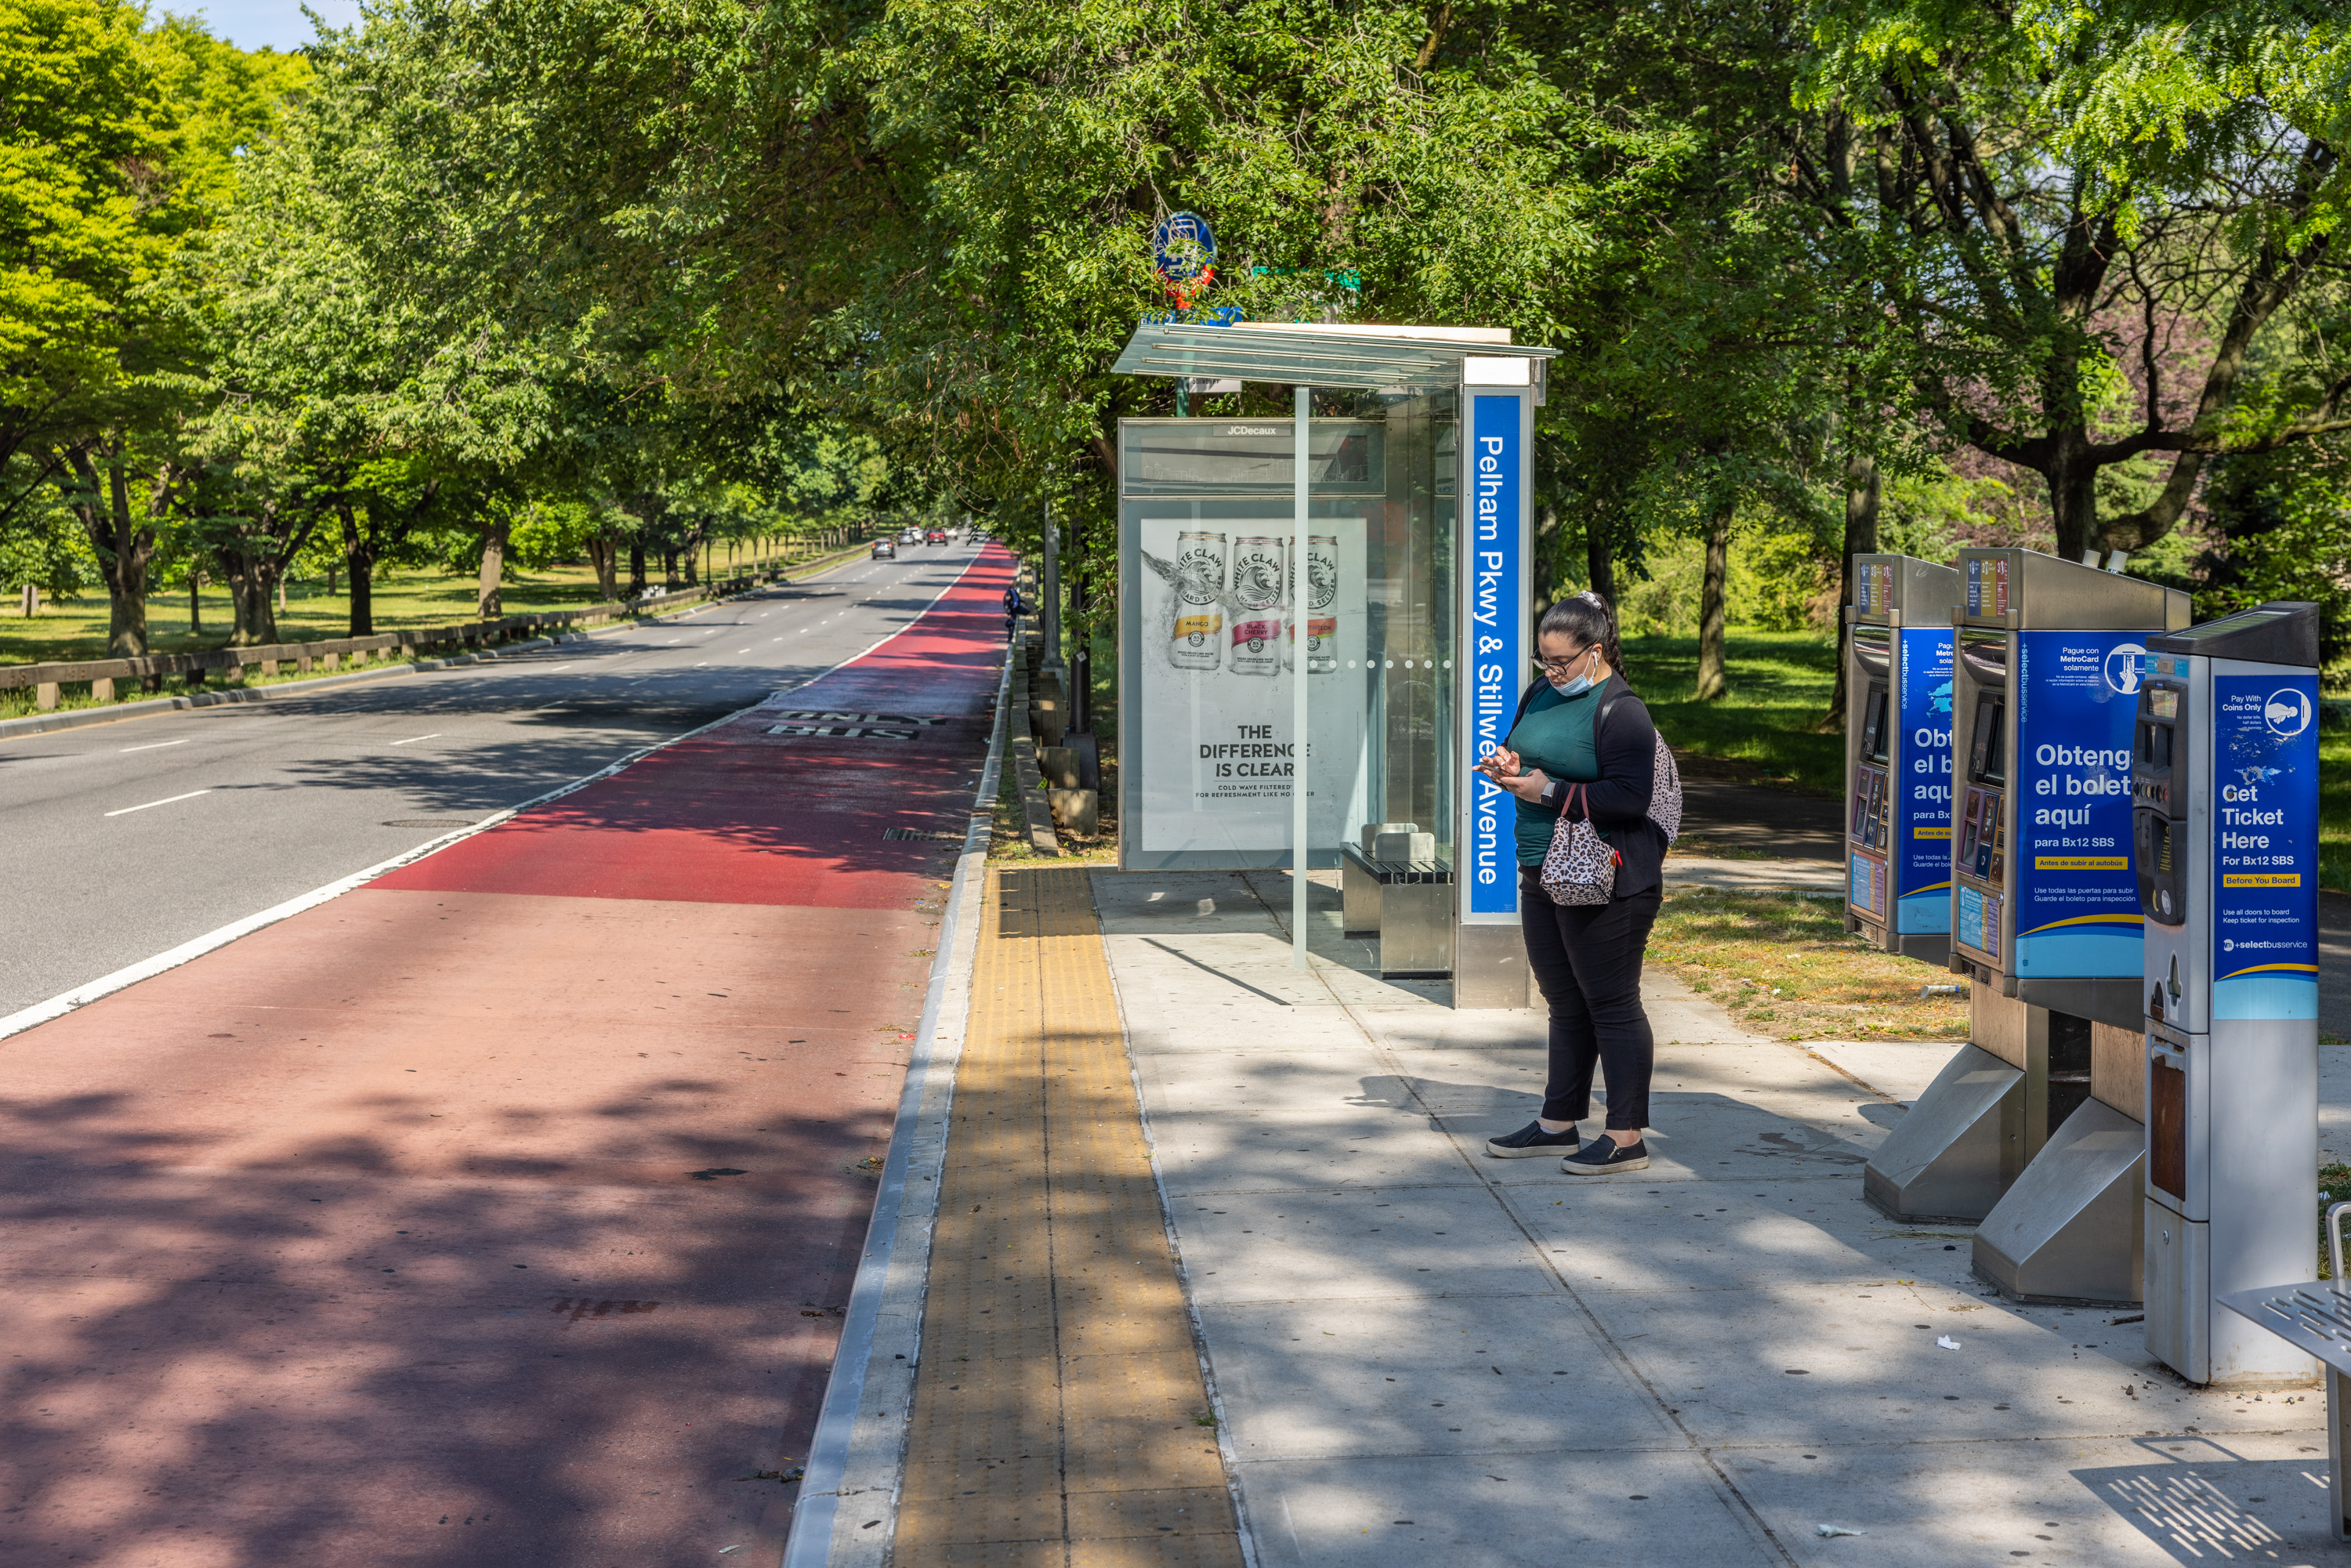 upgraded bus stop and new bus lane on Pelham Parkway